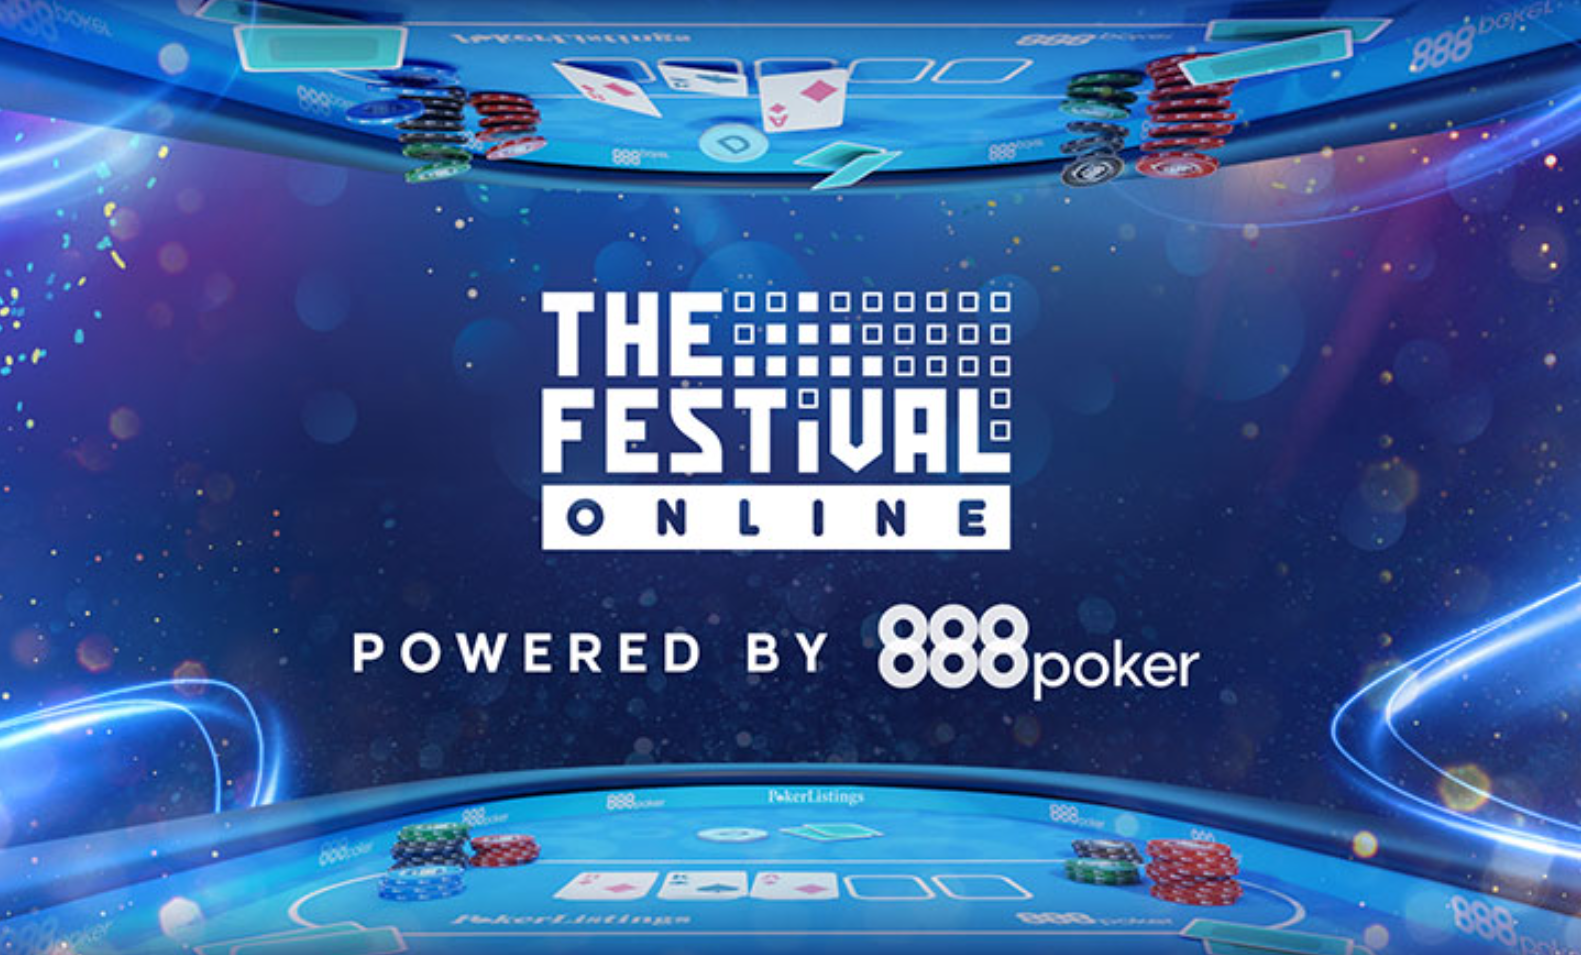 888poker, The Festival, & PokerListings Team Up to Host Online Version of Live Series